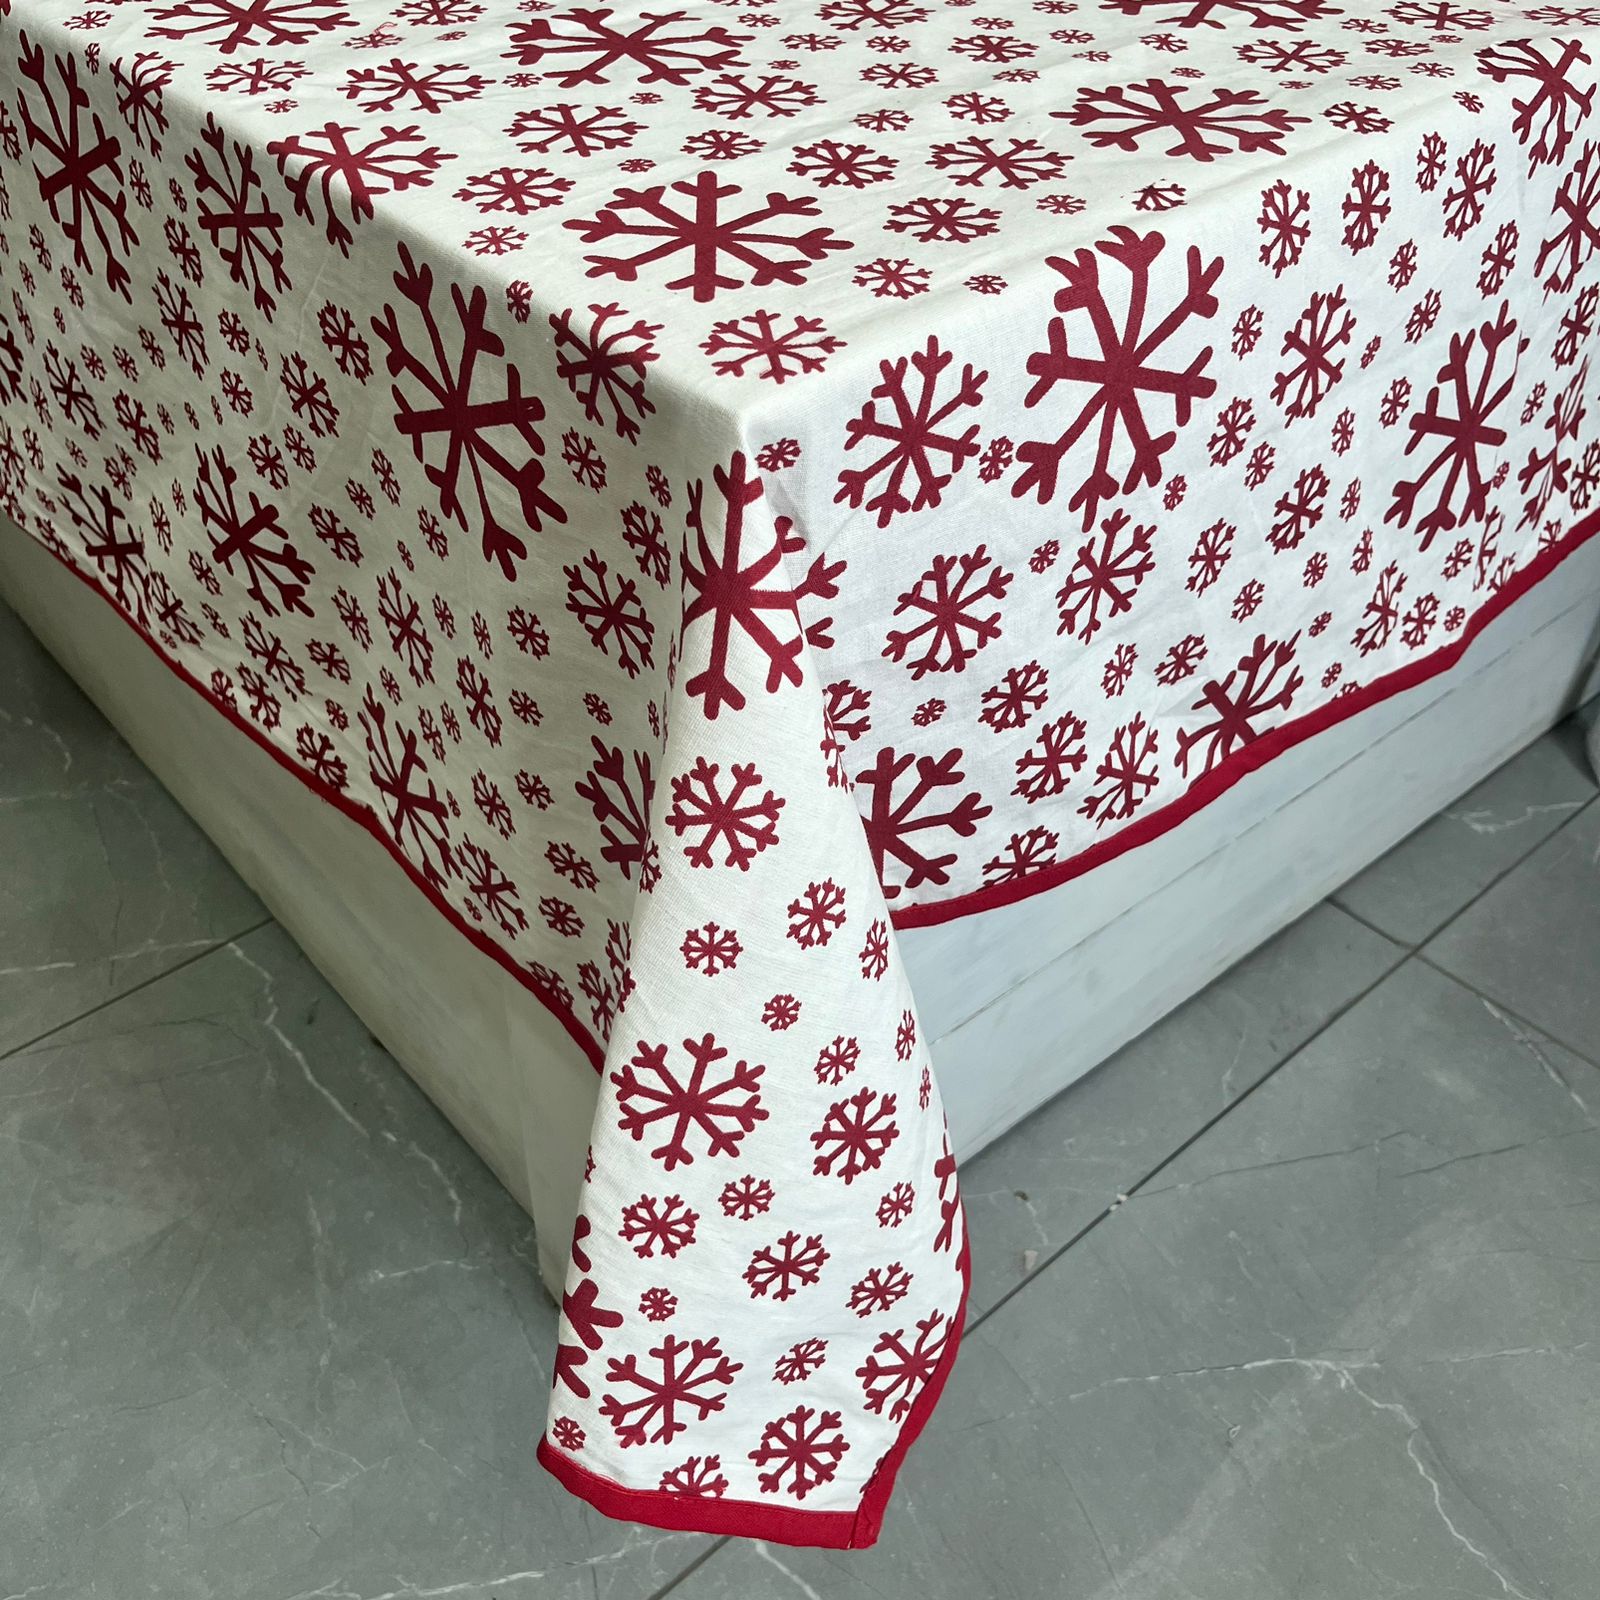 Christmas Themed Dining Sheet with size of Cotton